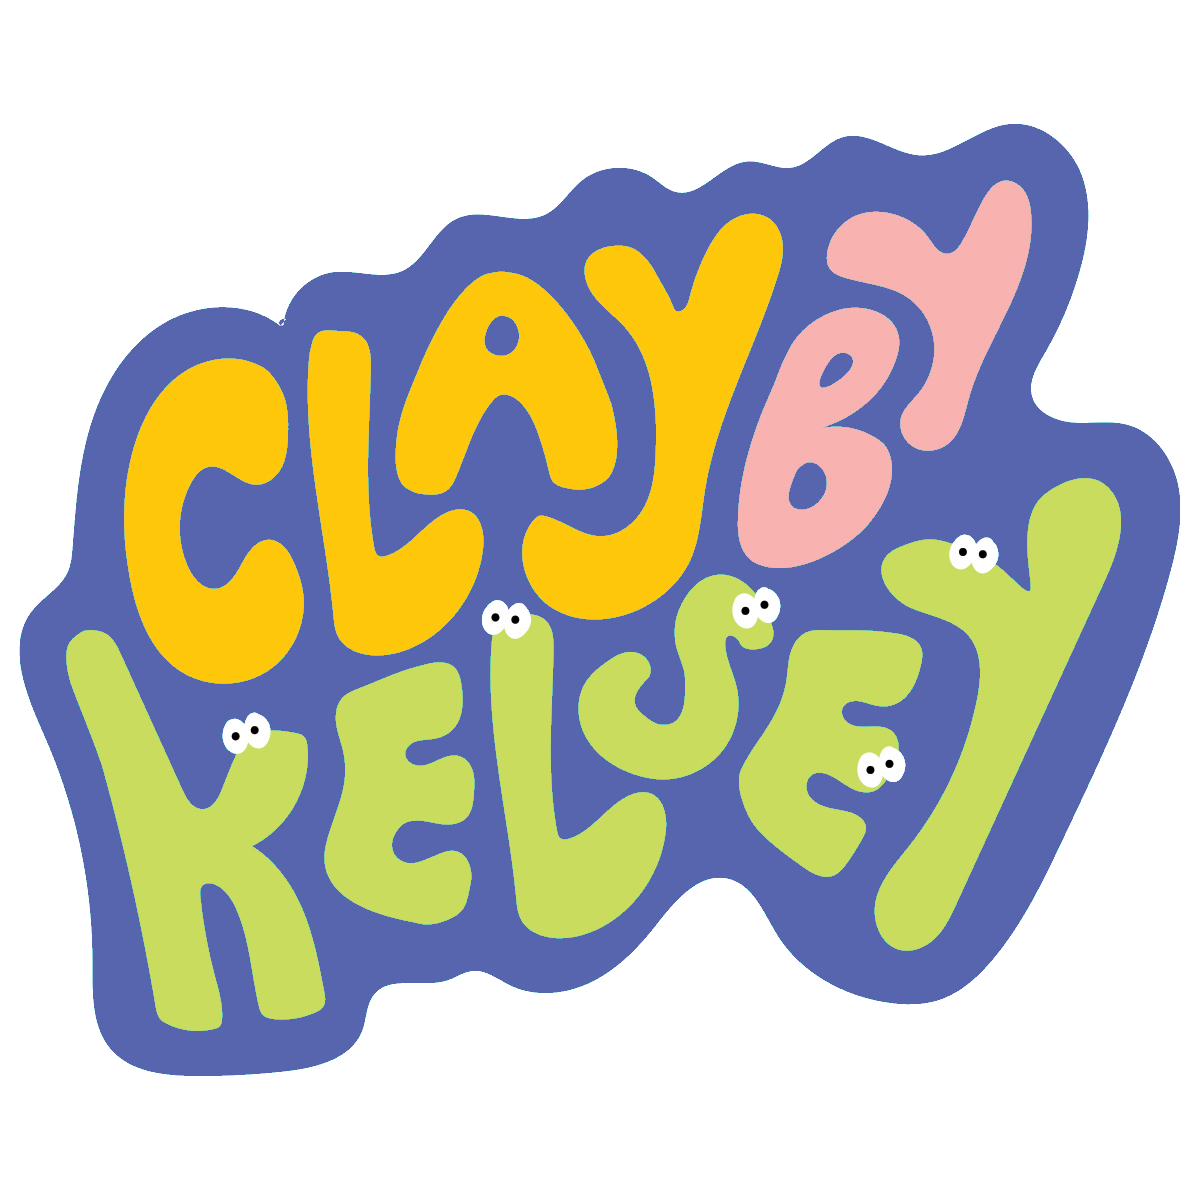 Clay by Kelsey